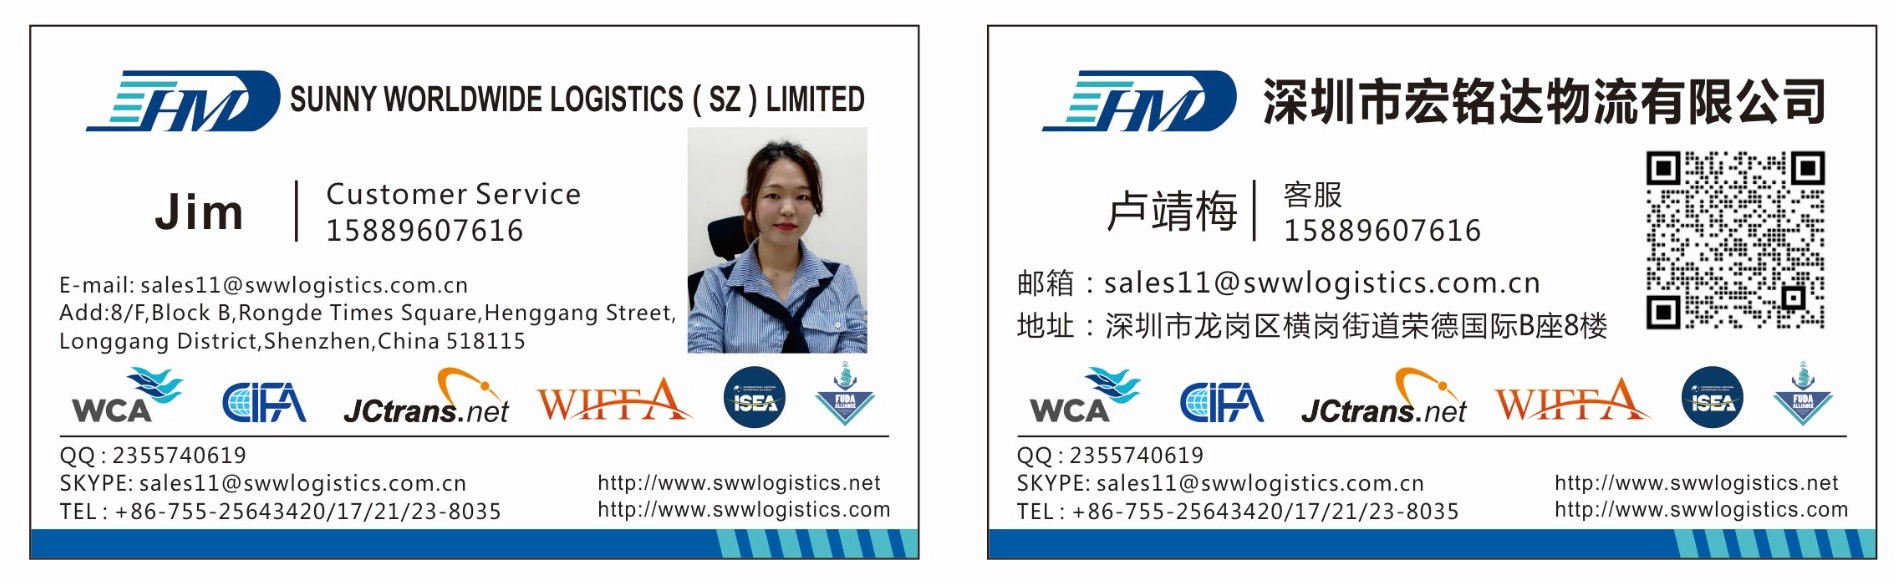 Logistics services company sea shipping cost from China to Philippines door to door delivery